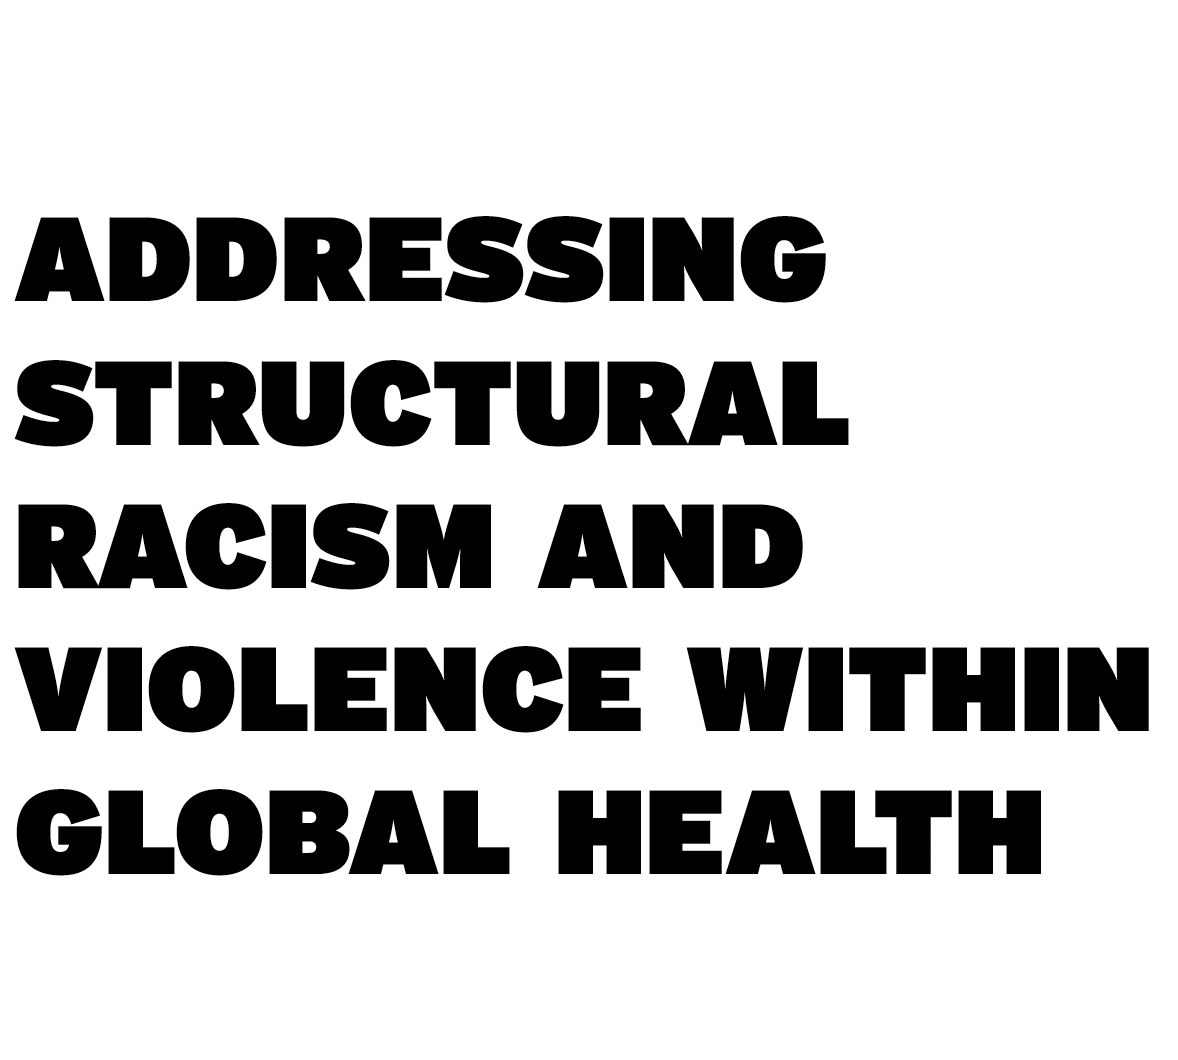 Addressing structural racism